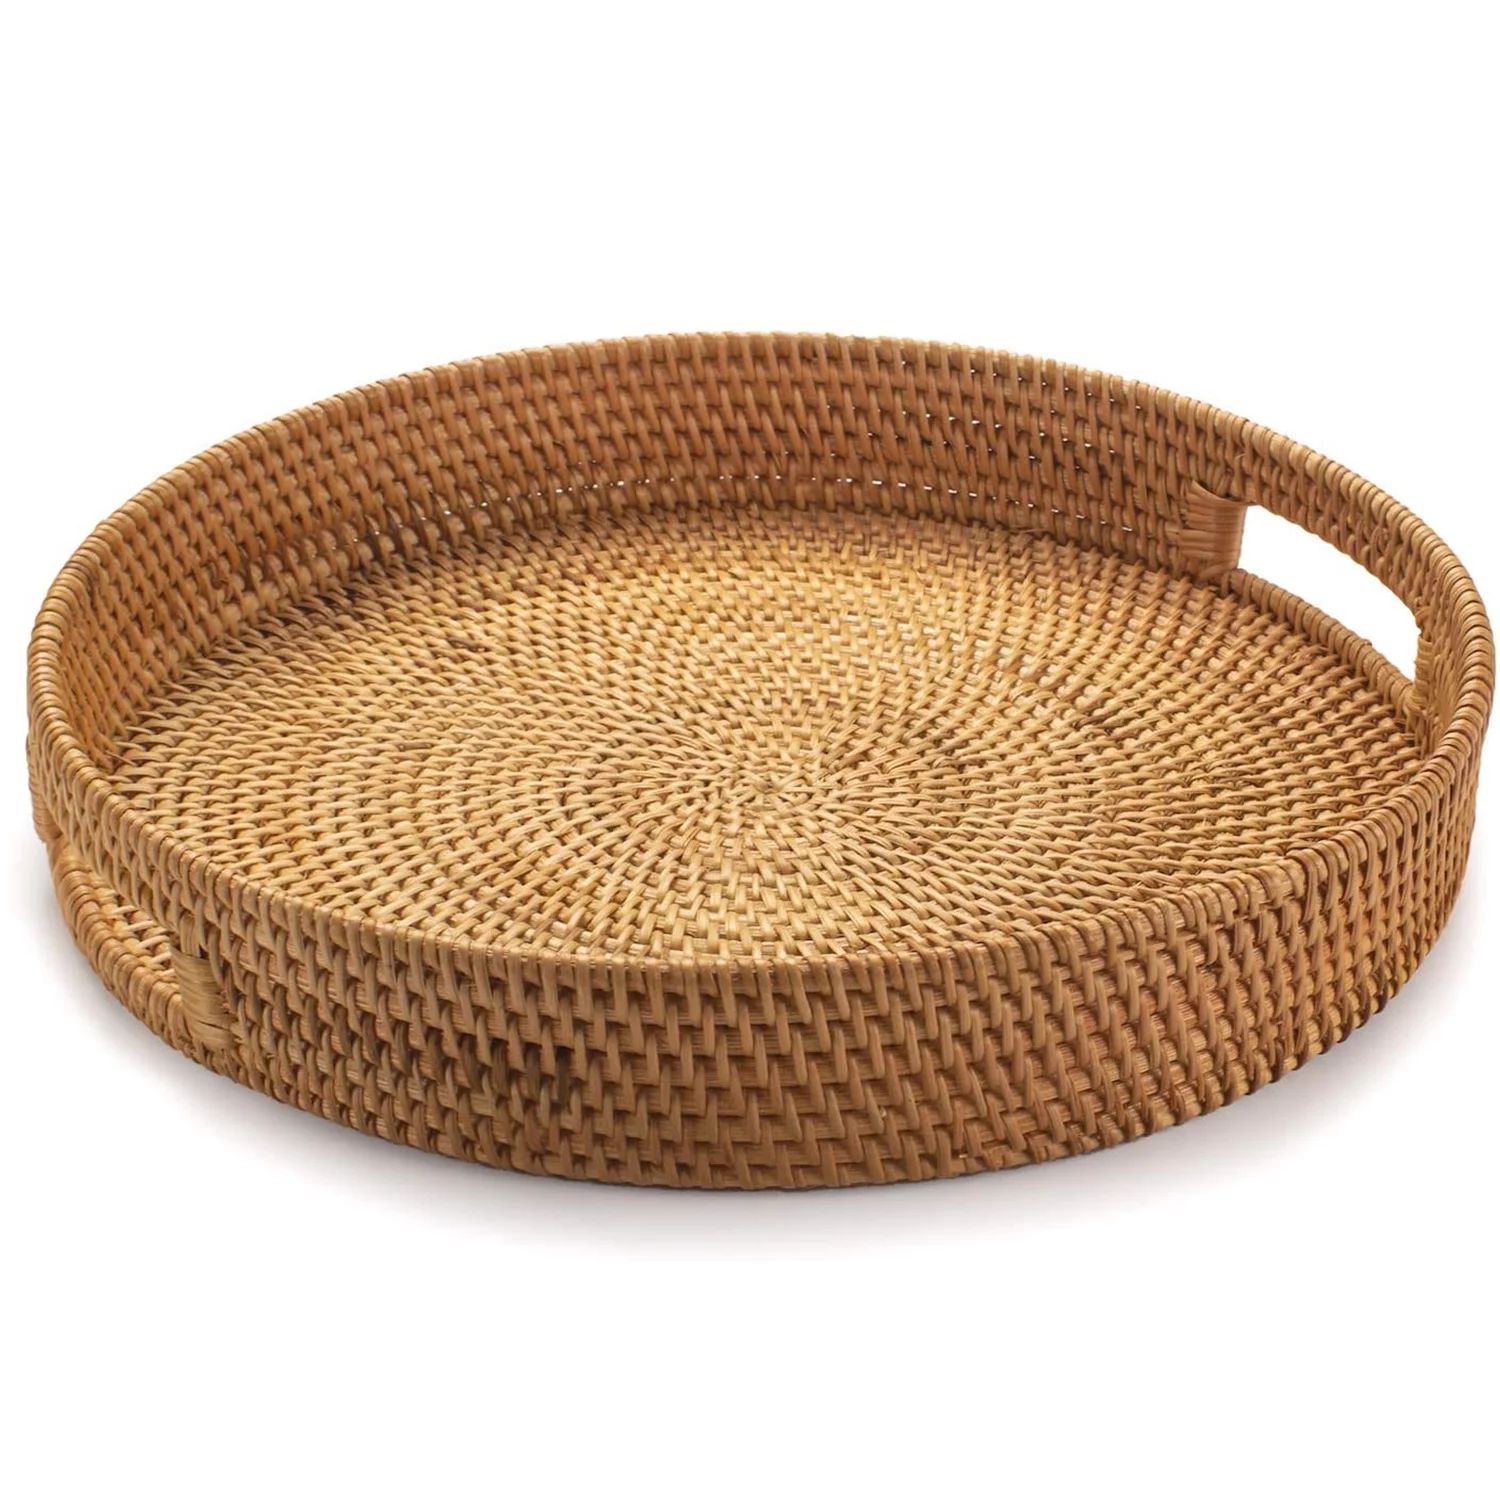 Fokelyi Rattan Serving Tray,11.8" Round Natural Colored Water Hyacinth Woven Tray with Handles | Walmart (US)